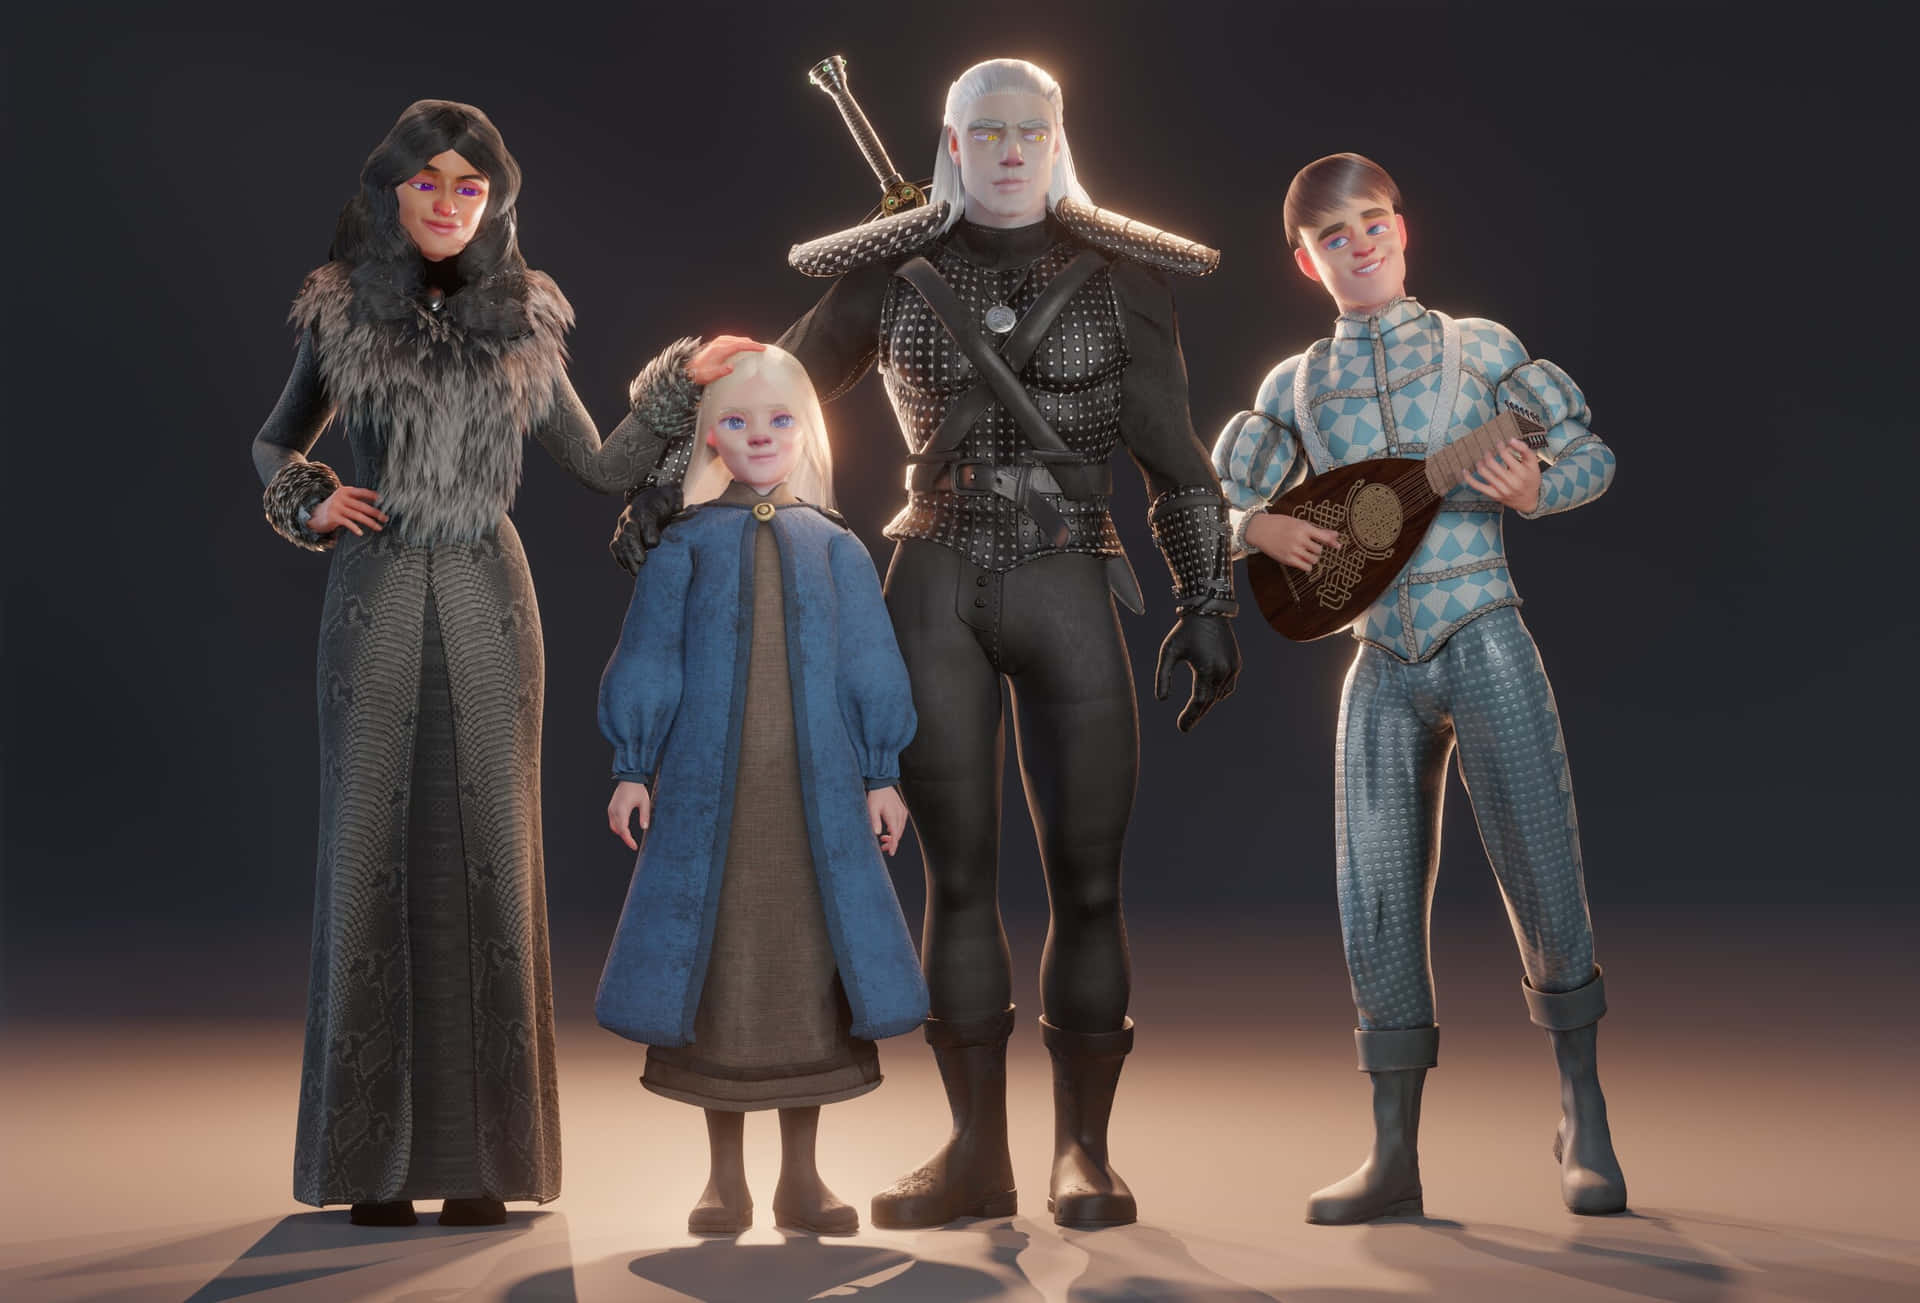 The Witcher Characters Group Image Wallpaper